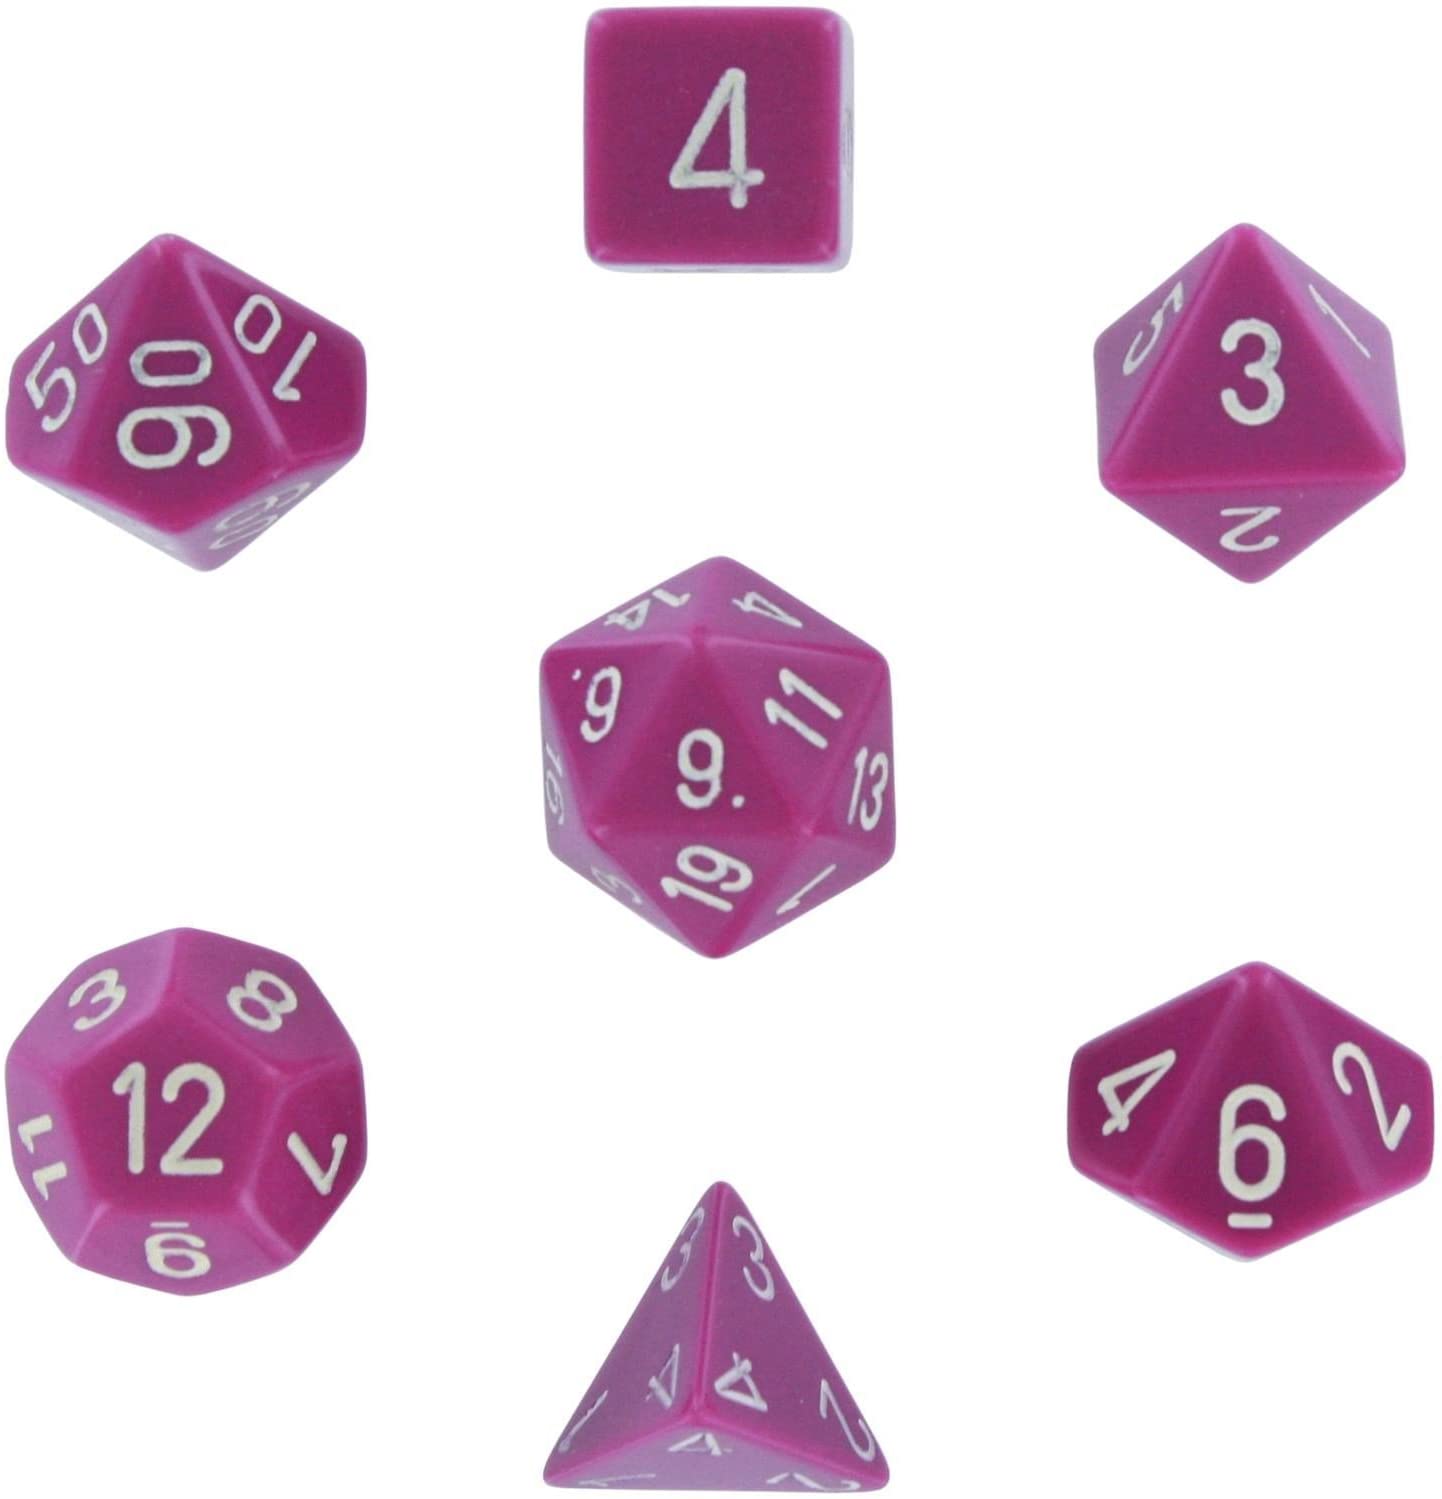 Chessex Dice: 7 Die Set - Opaque - Light Purple with White (CHX 25427) - Gamescape